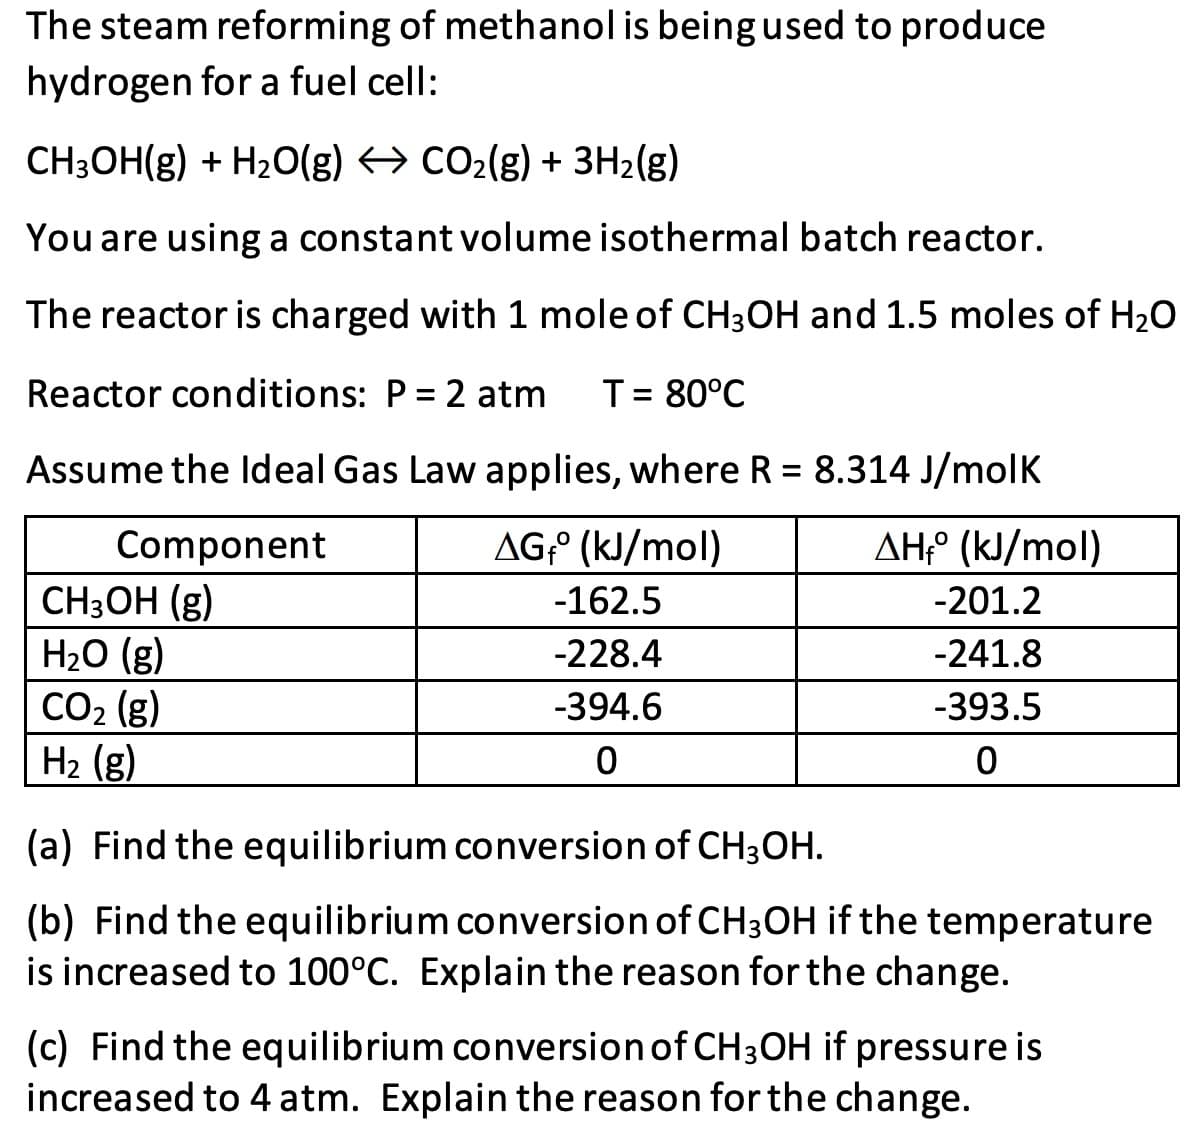 The steam reforming of methanol is being used to produce
hydrogen for a fuel cell:
CH3OH(g) + H20(g) → CO2(g) + 3H2(g)
You are using a constant volume isothermal batch reactor.
The reactor is charged with 1 mole of CH3OH and 1.5 moles of H20
Reactor conditions: P = 2 atm
T= 80°C
Assume the ldeal Gas Law applies, where R = 8.314 J/molK
%3D
AG;° (kJ/mol)
AH° (kJ/mol)
Component
CH3OH (g)
H2O (g)
CO2 (g)
H2 (g)
-162.5
-201.2
-228.4
-241.8
-394.6
-393.5
(a) Find the equilibrium conversion of CH3OH.
(b) Find the equilibrium conversion of CH3OH if the temperature
is increased to 100°C. Explain the reason for the change.
(c) Find the equilibrium conversion of CH3OH if pressure is
increased to 4 atm. Explain the reason for the change.
